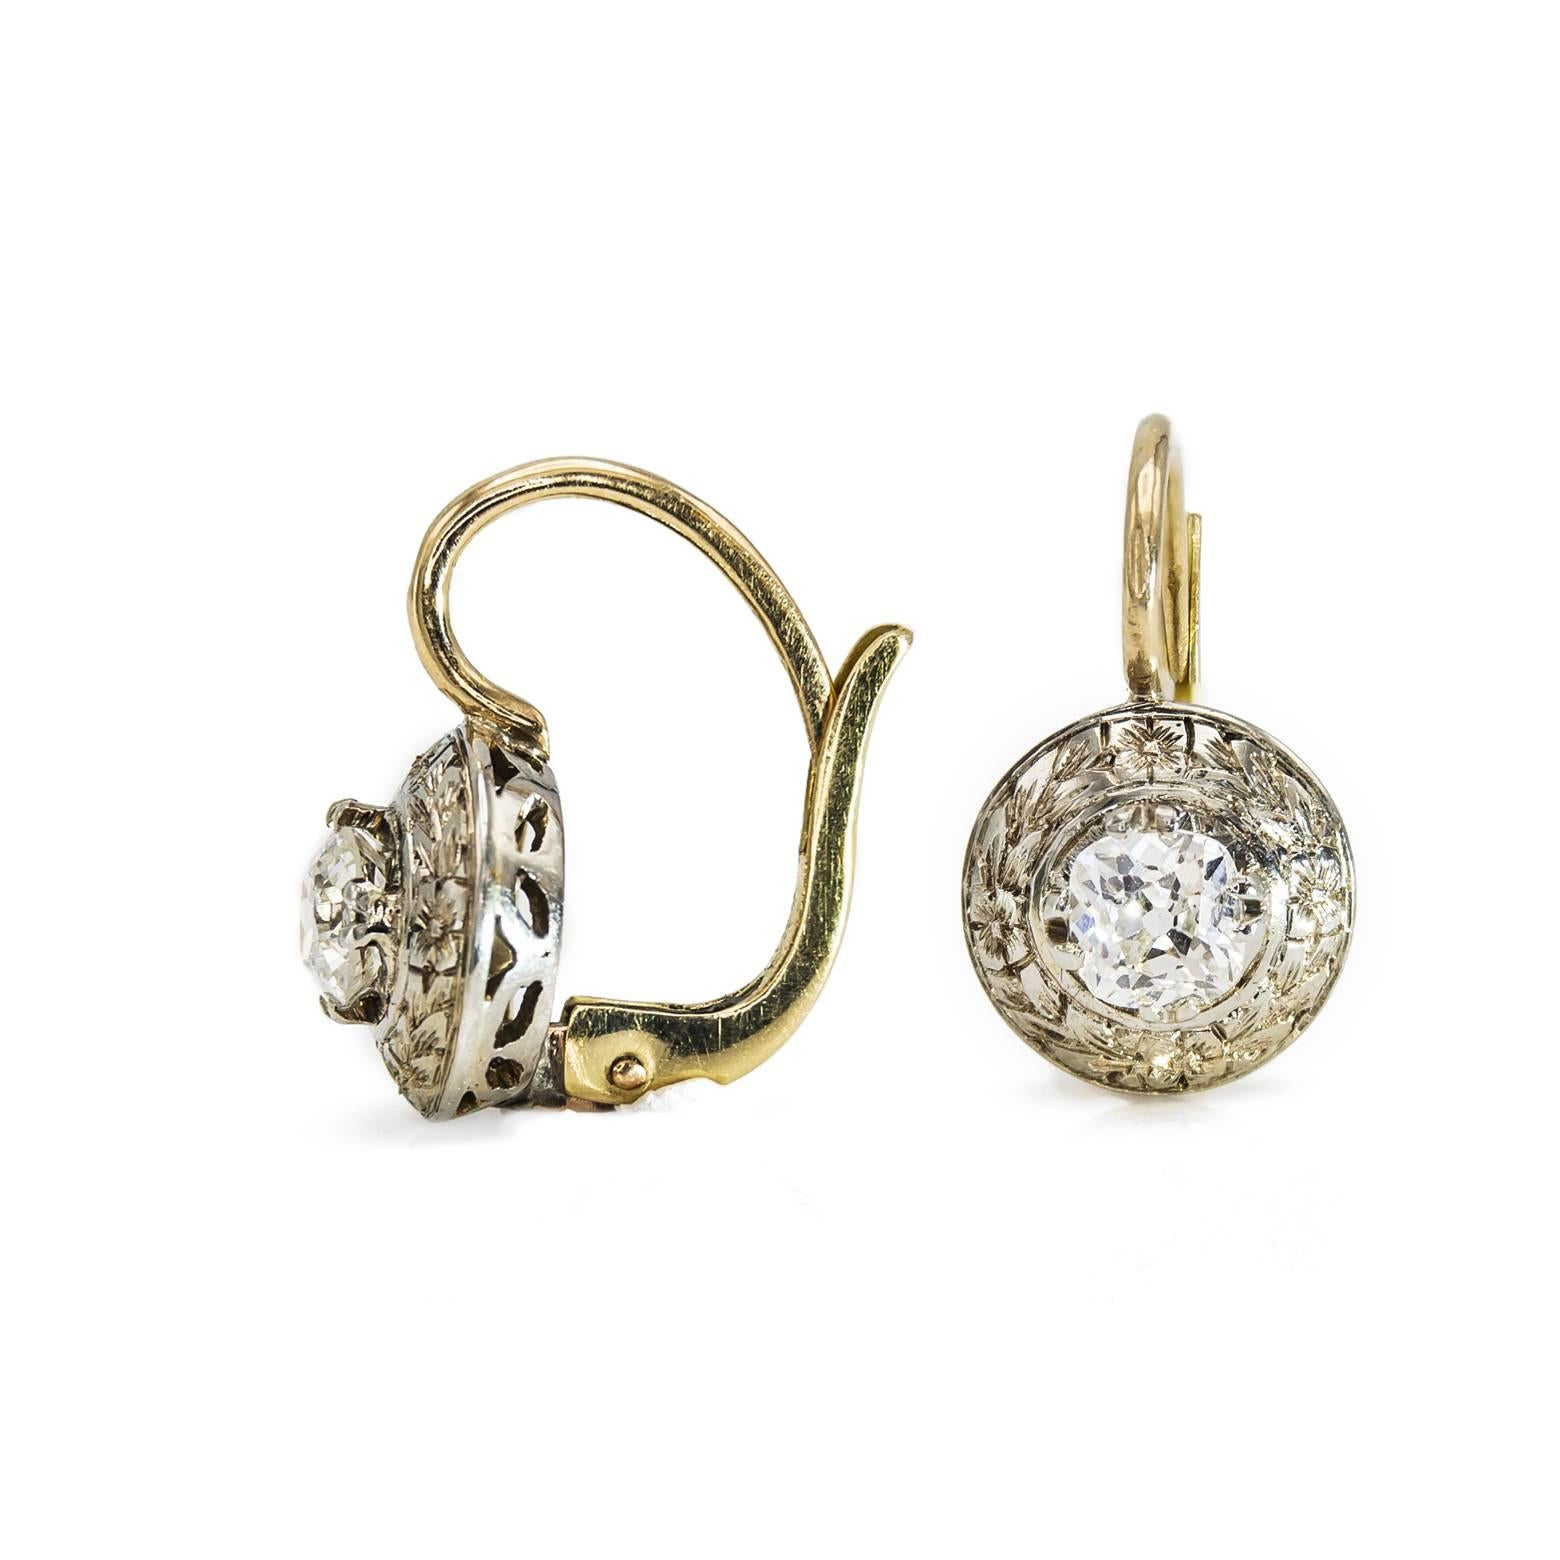 These beautiful antique round old mine-cut diamond earrings have a gorgeous floral halo around the center diamond. Engraved in white gold these gorgeous diamond earrings tell stories of a romantic time and place in Italy among the fountains and